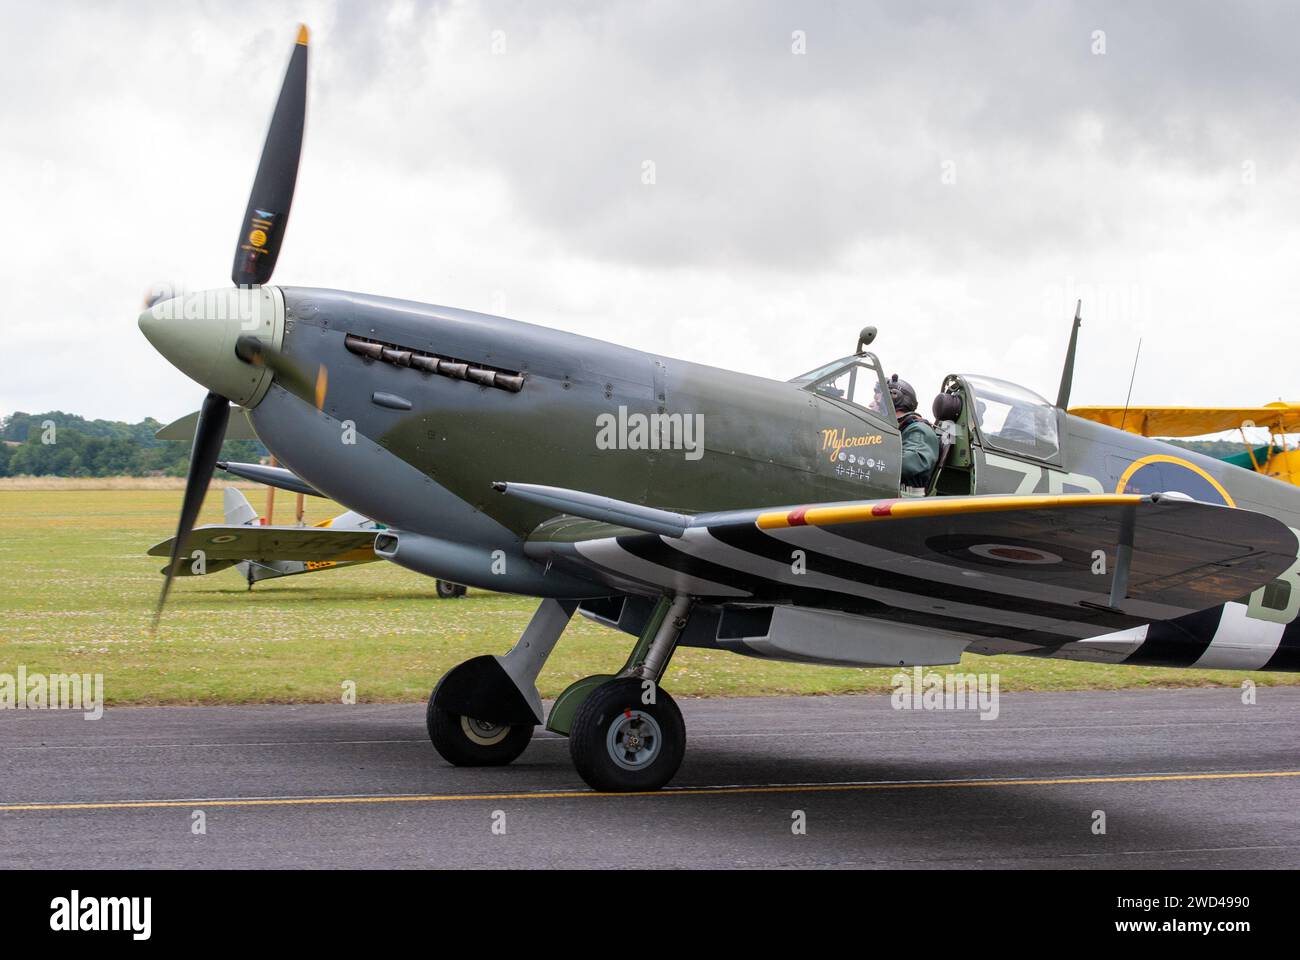 Spitfire WW2 fighter plane side view of the rare aircraft at flying legends airshow in 2014. Stock Photo